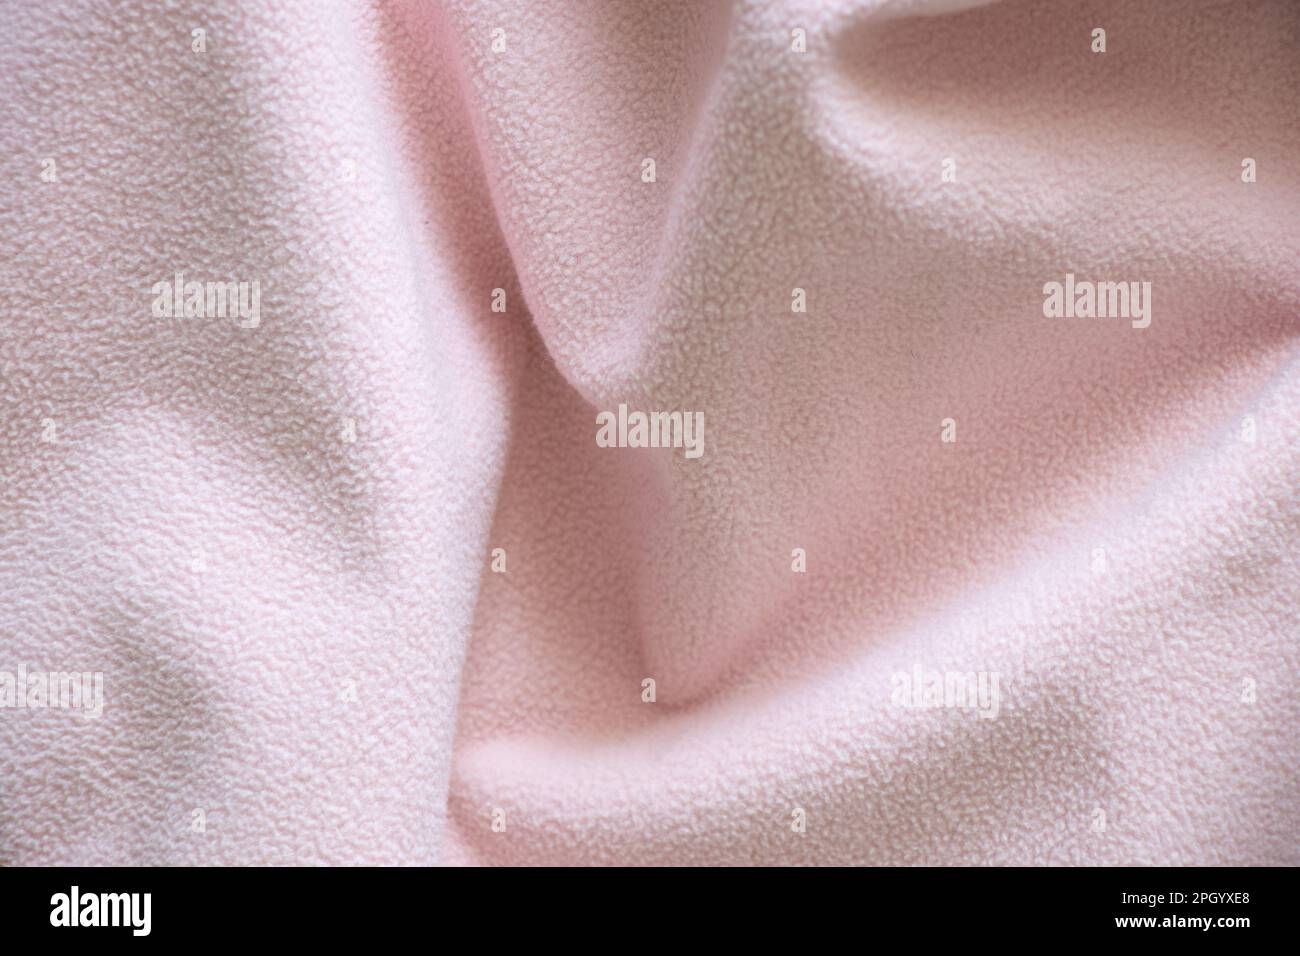 pale pink fleecy wrinkled fabric as a background close-up Stock Photo